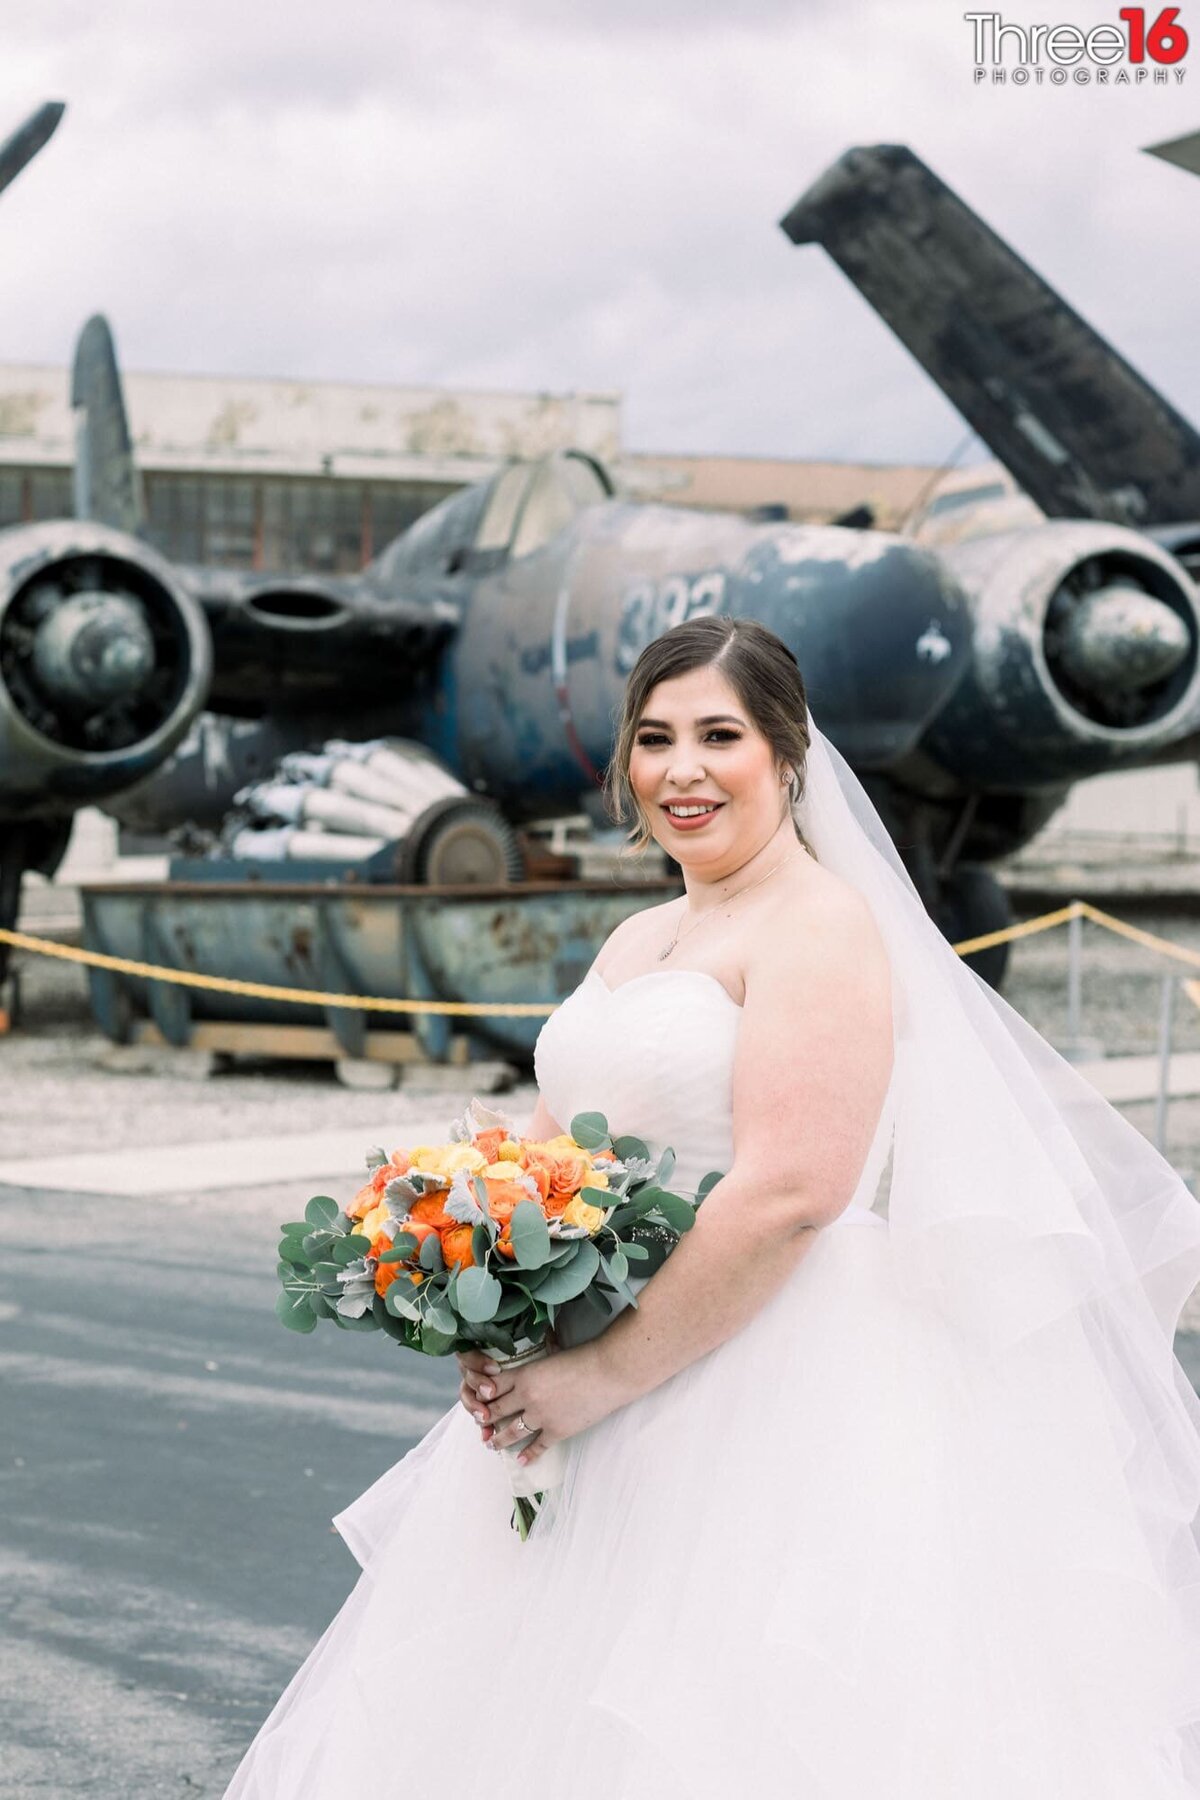 Bride poses with her bouquet with a classic plane in the background